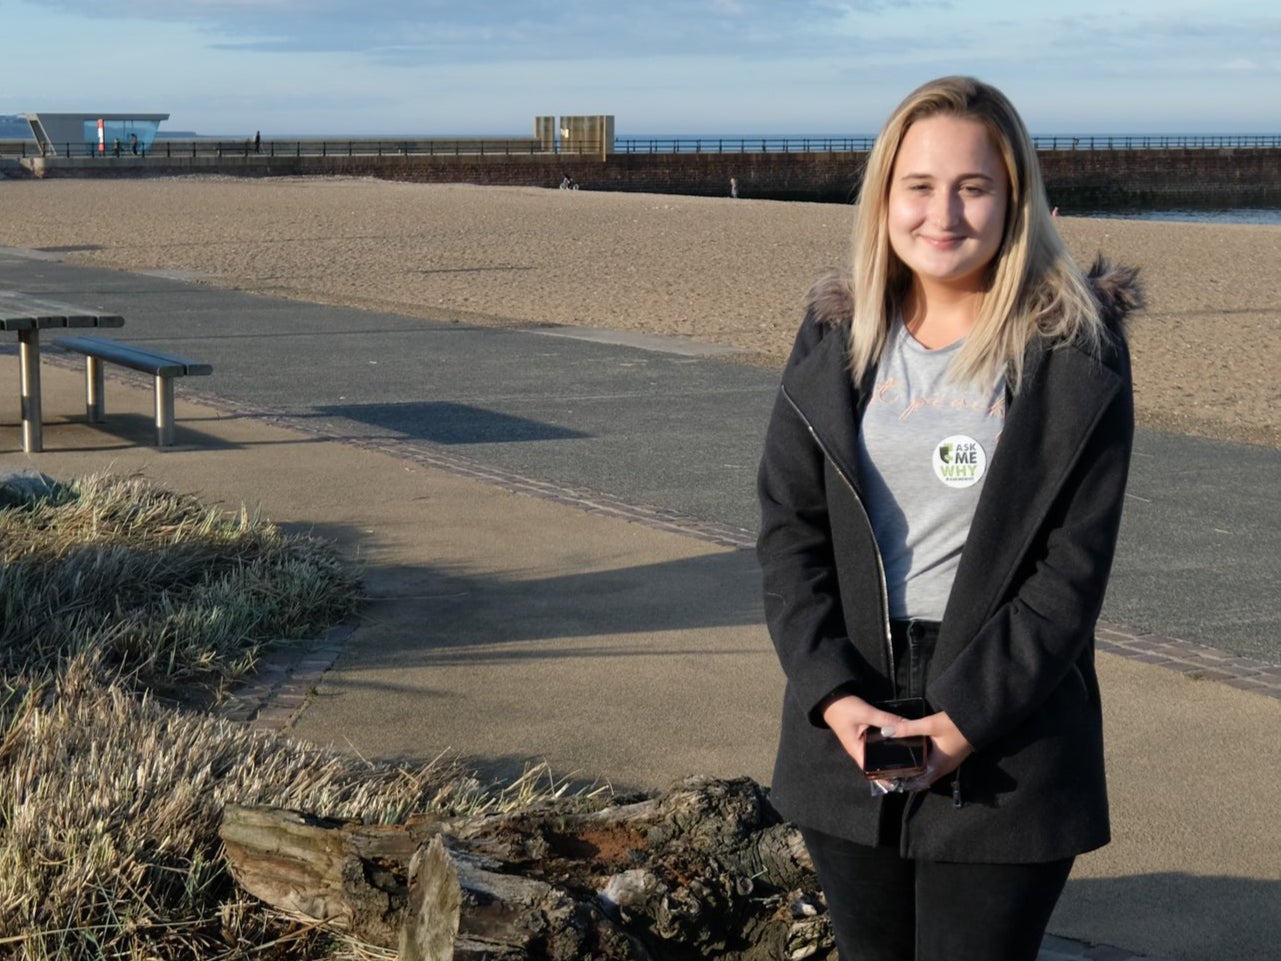 Paige Hunter, from Sunderland, returns to Wearmouth Bridge where she almost took her own life regularly to post messages of hope for other people in mental health crises